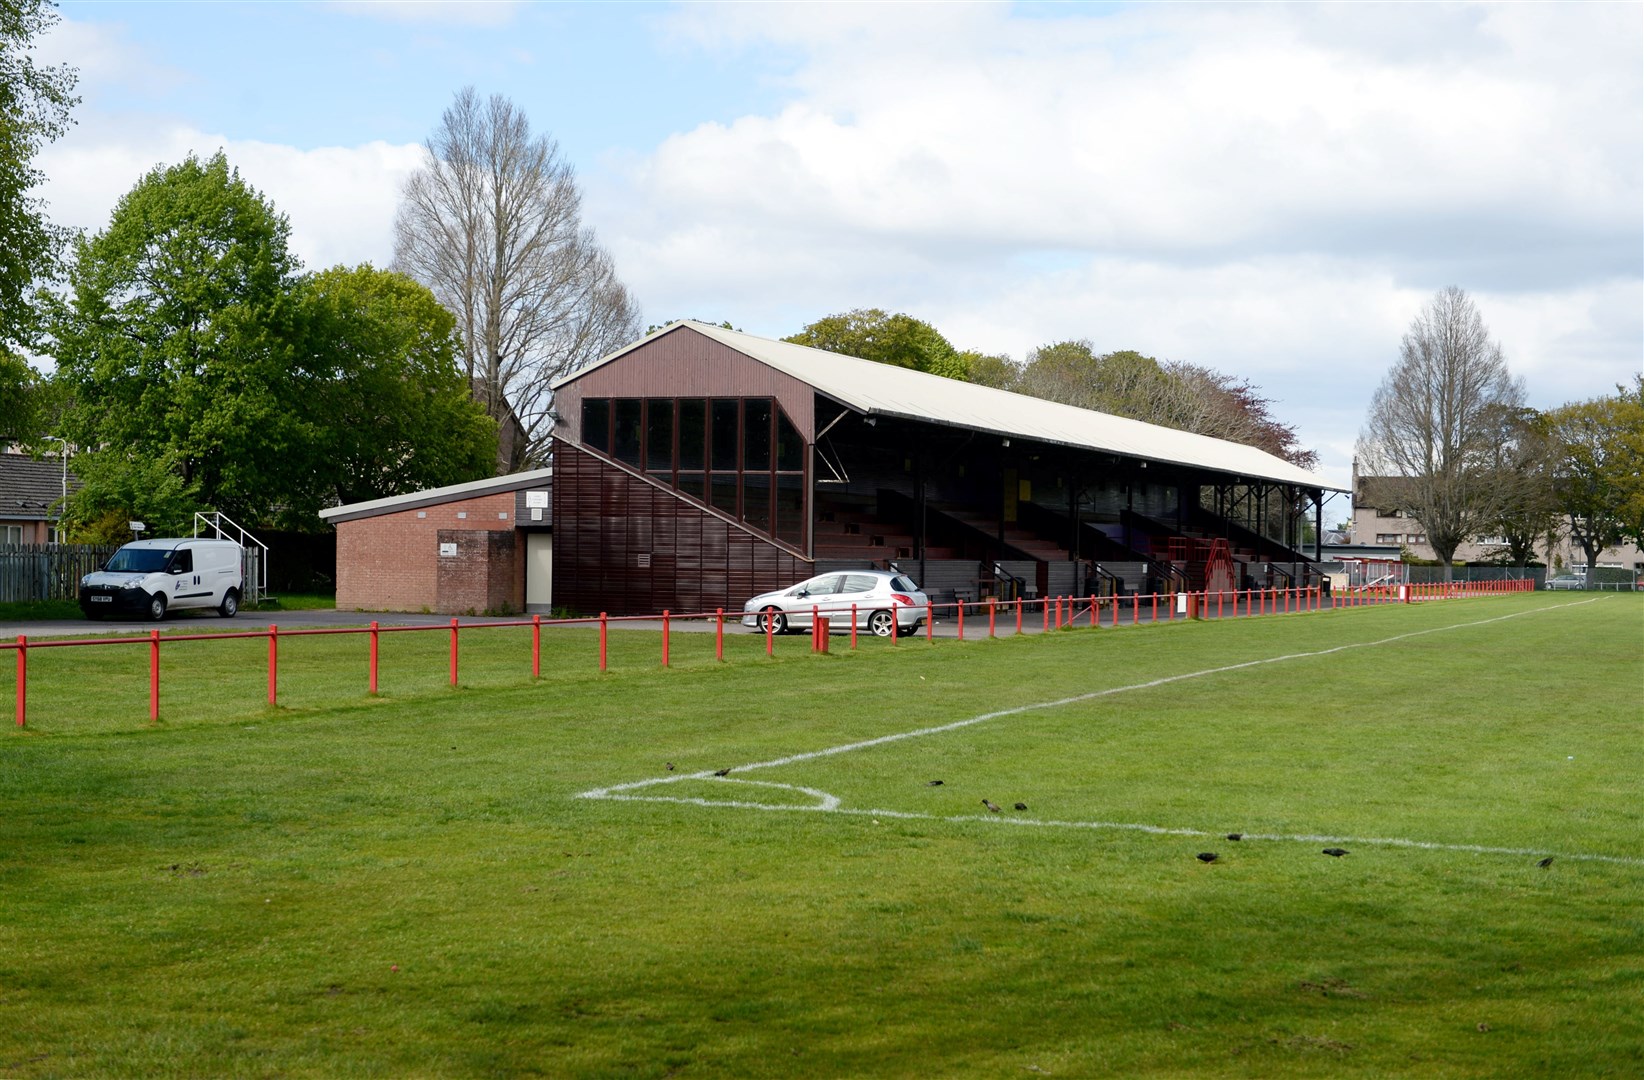 Bught Park is the venue for the cup final.